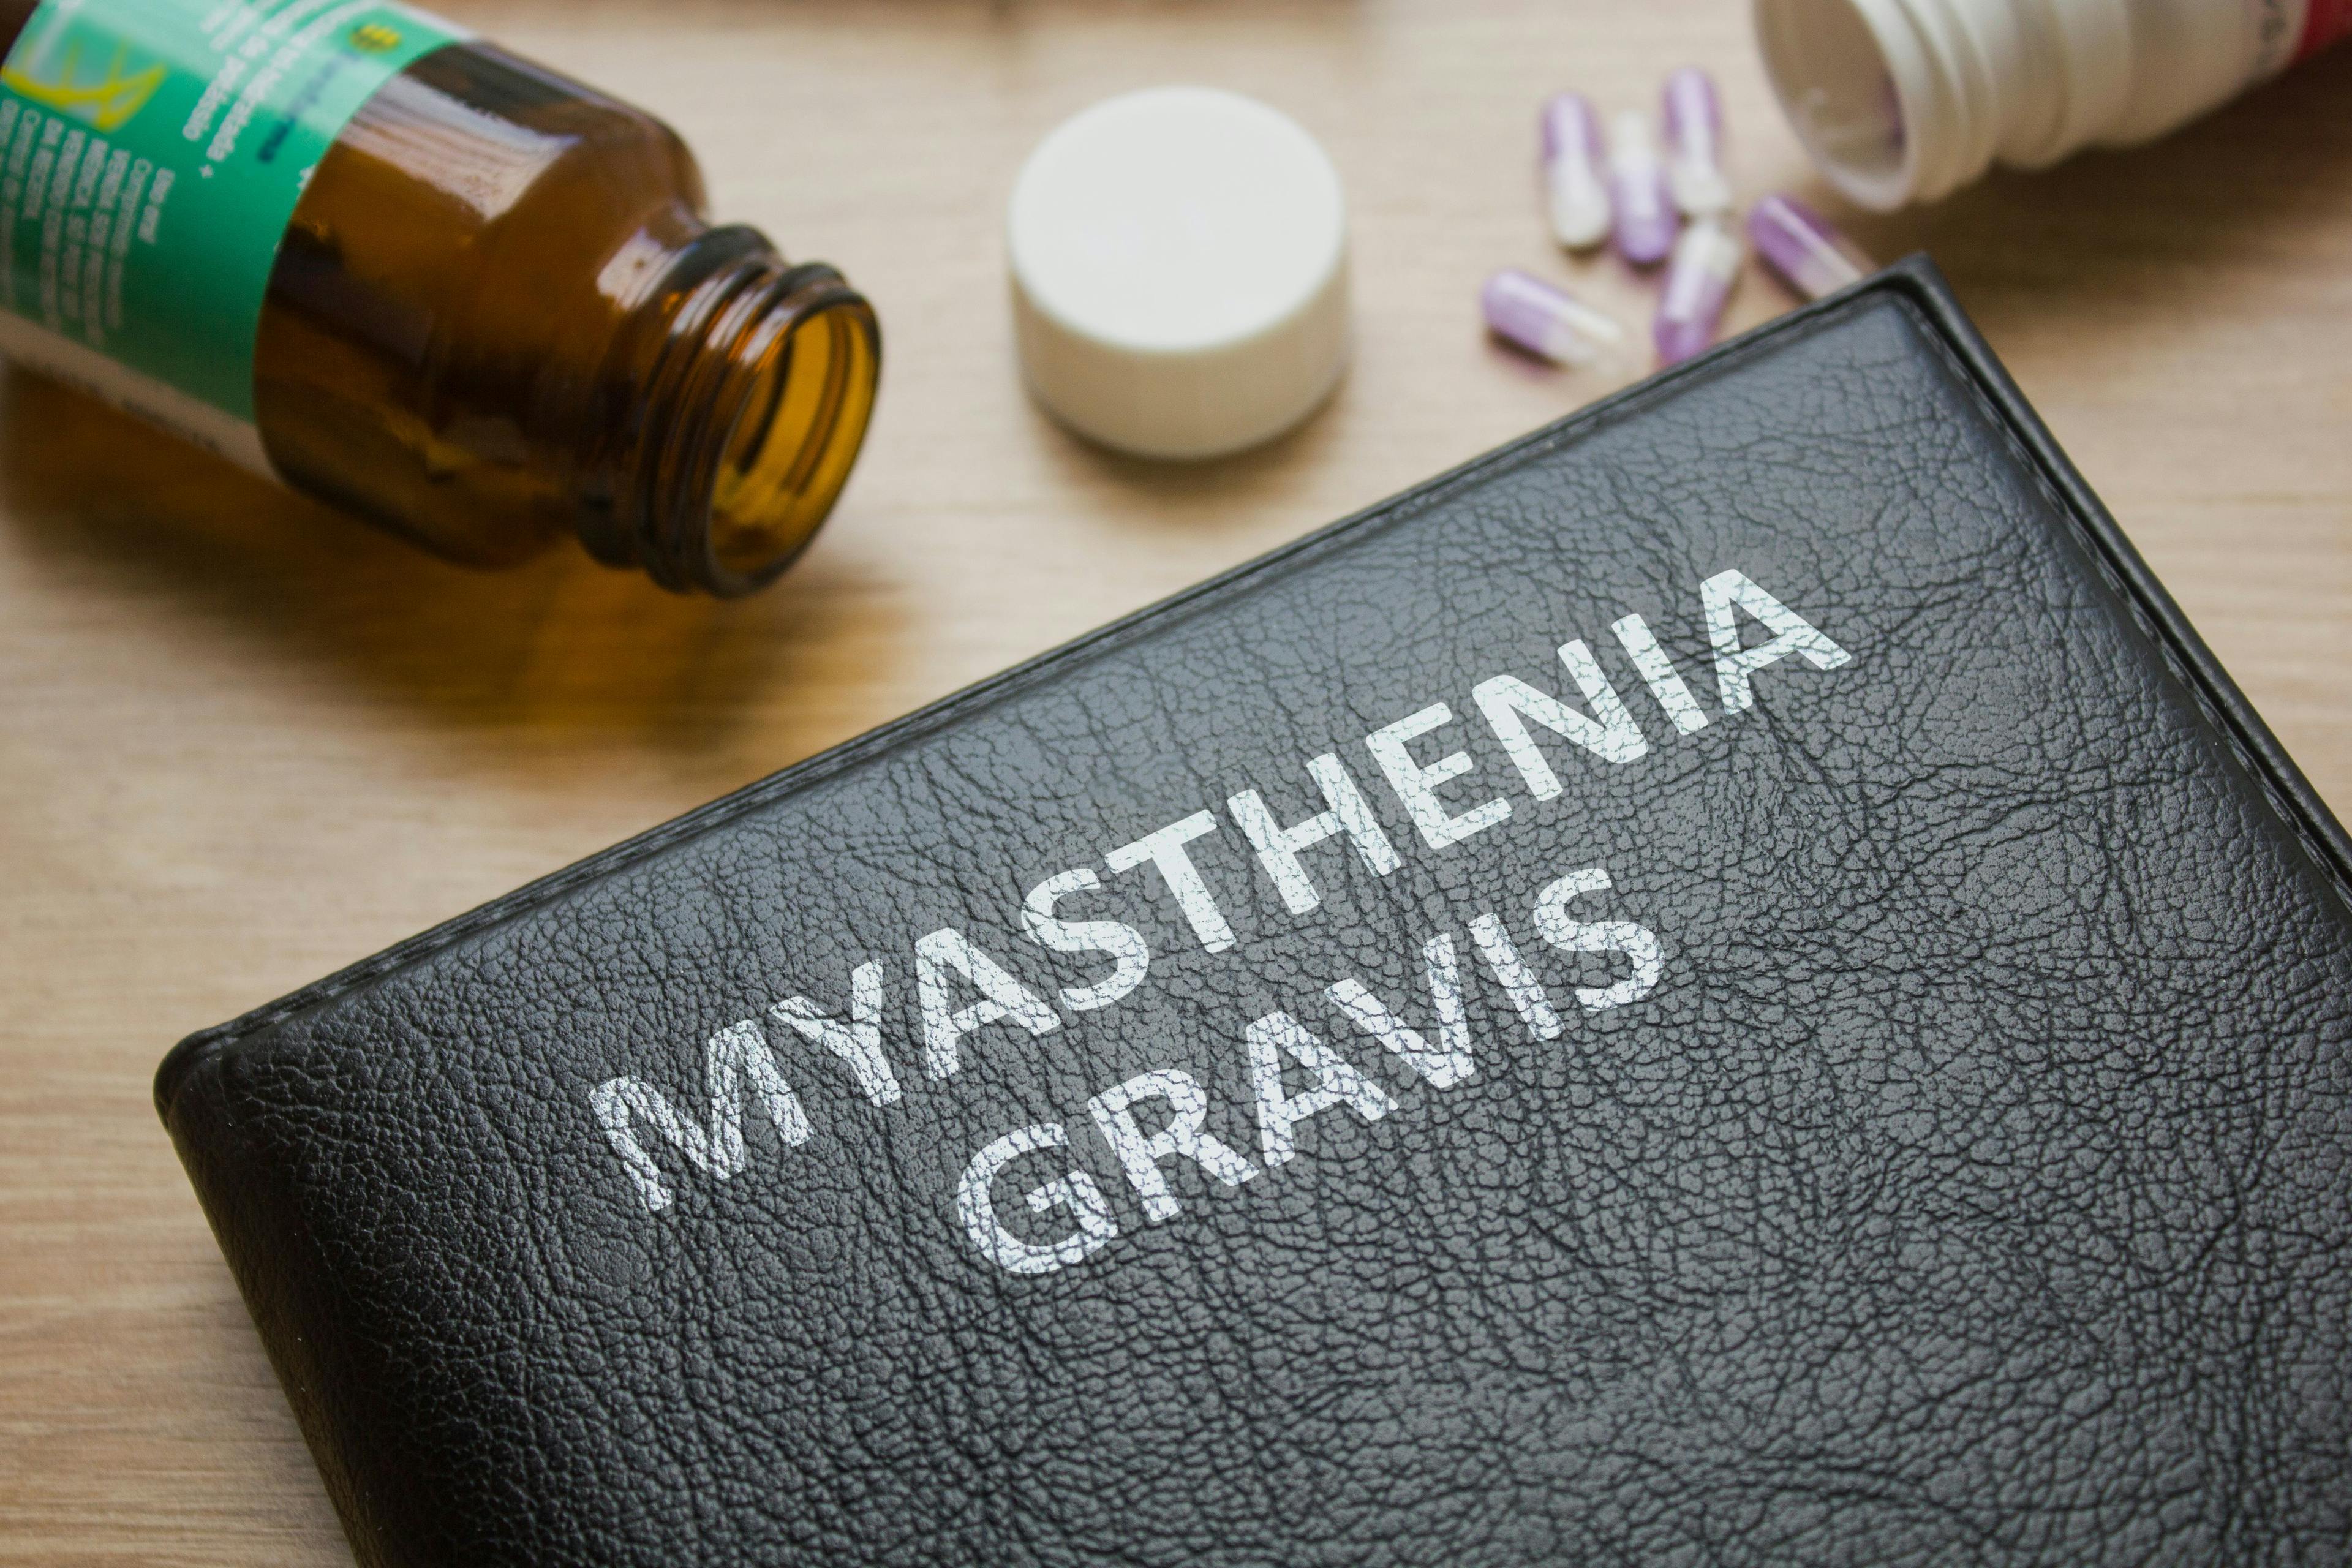 Book about Myasthenia gravis and medication, injection, syringe and pills:Black book  © mdaros - stock.adobe.com